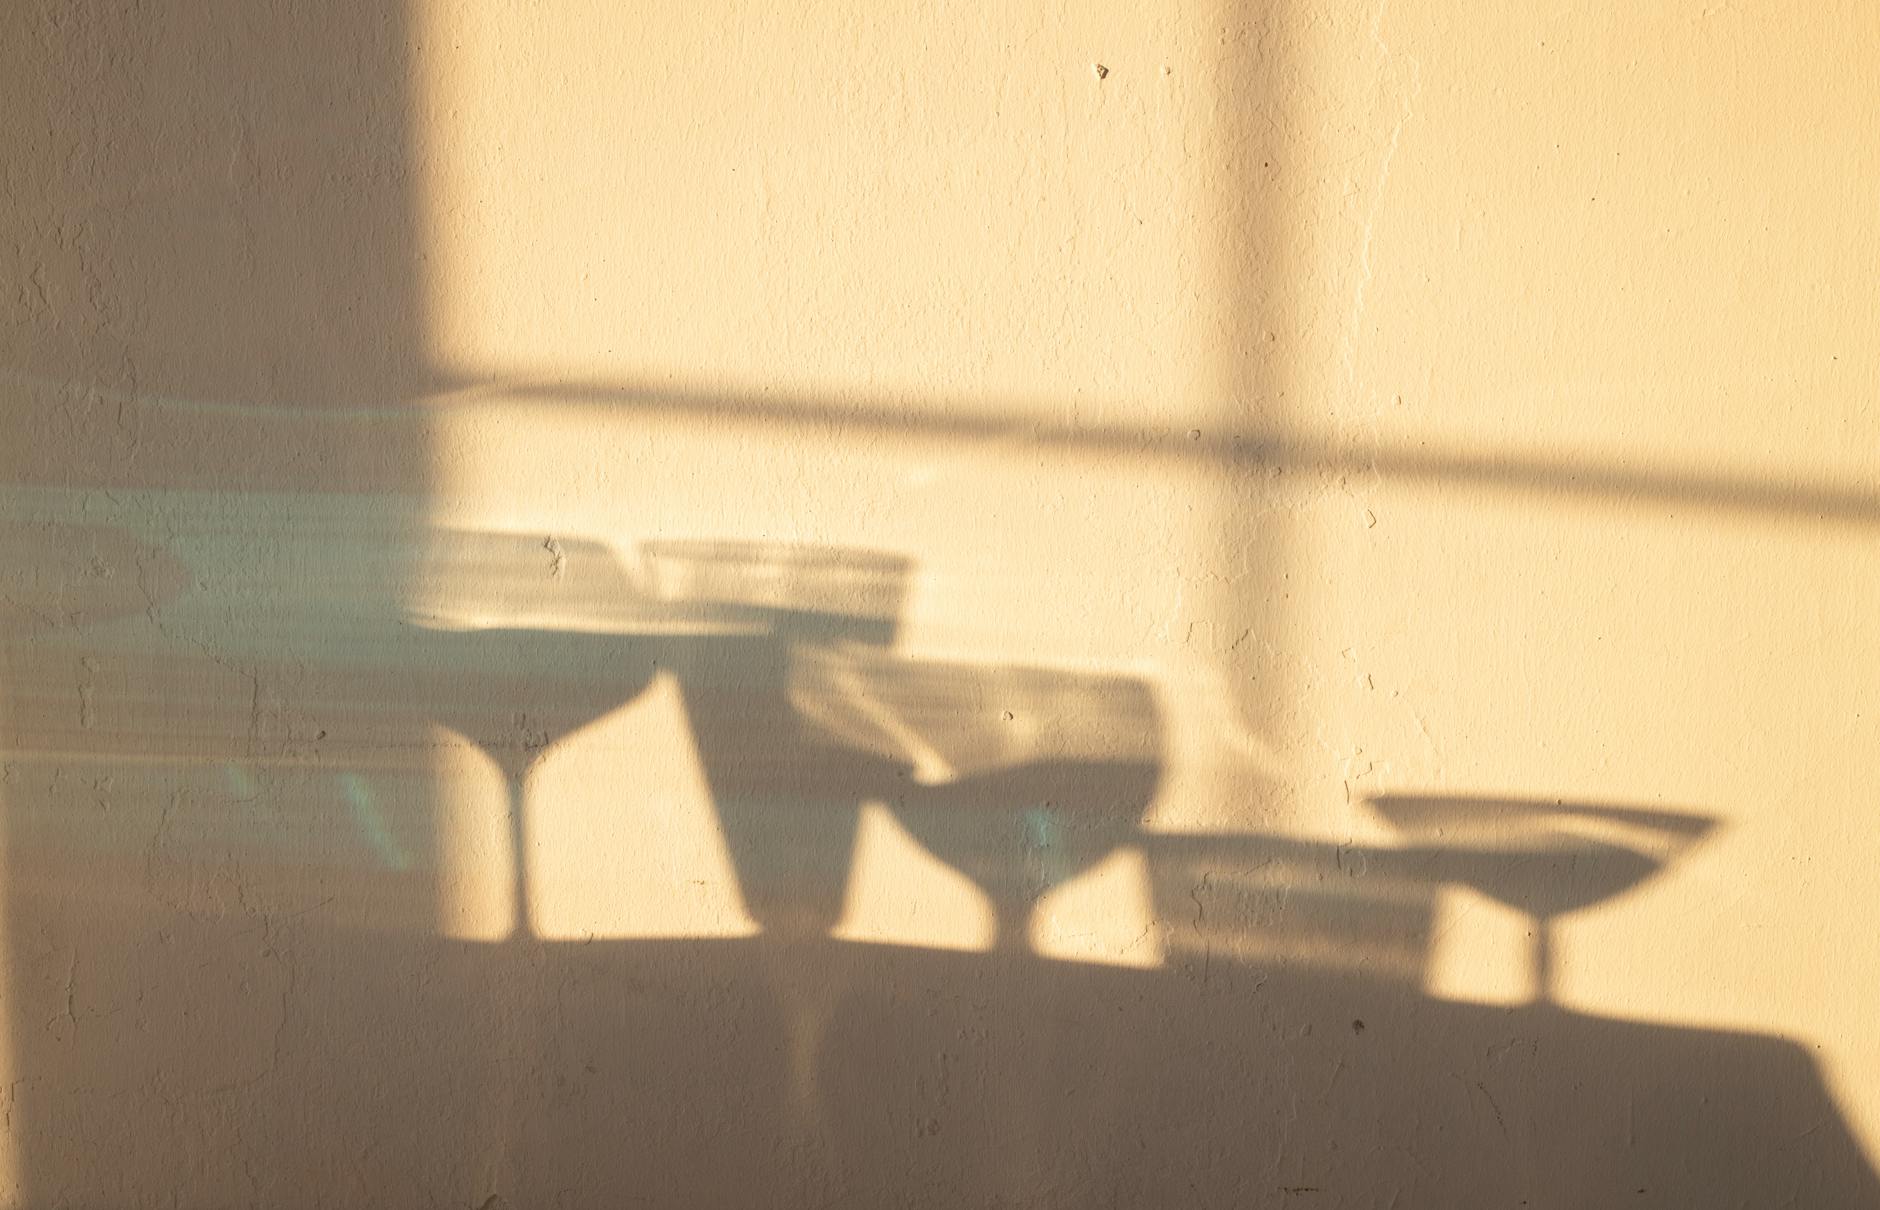 Shadows of different crystal glasses filled with drinks